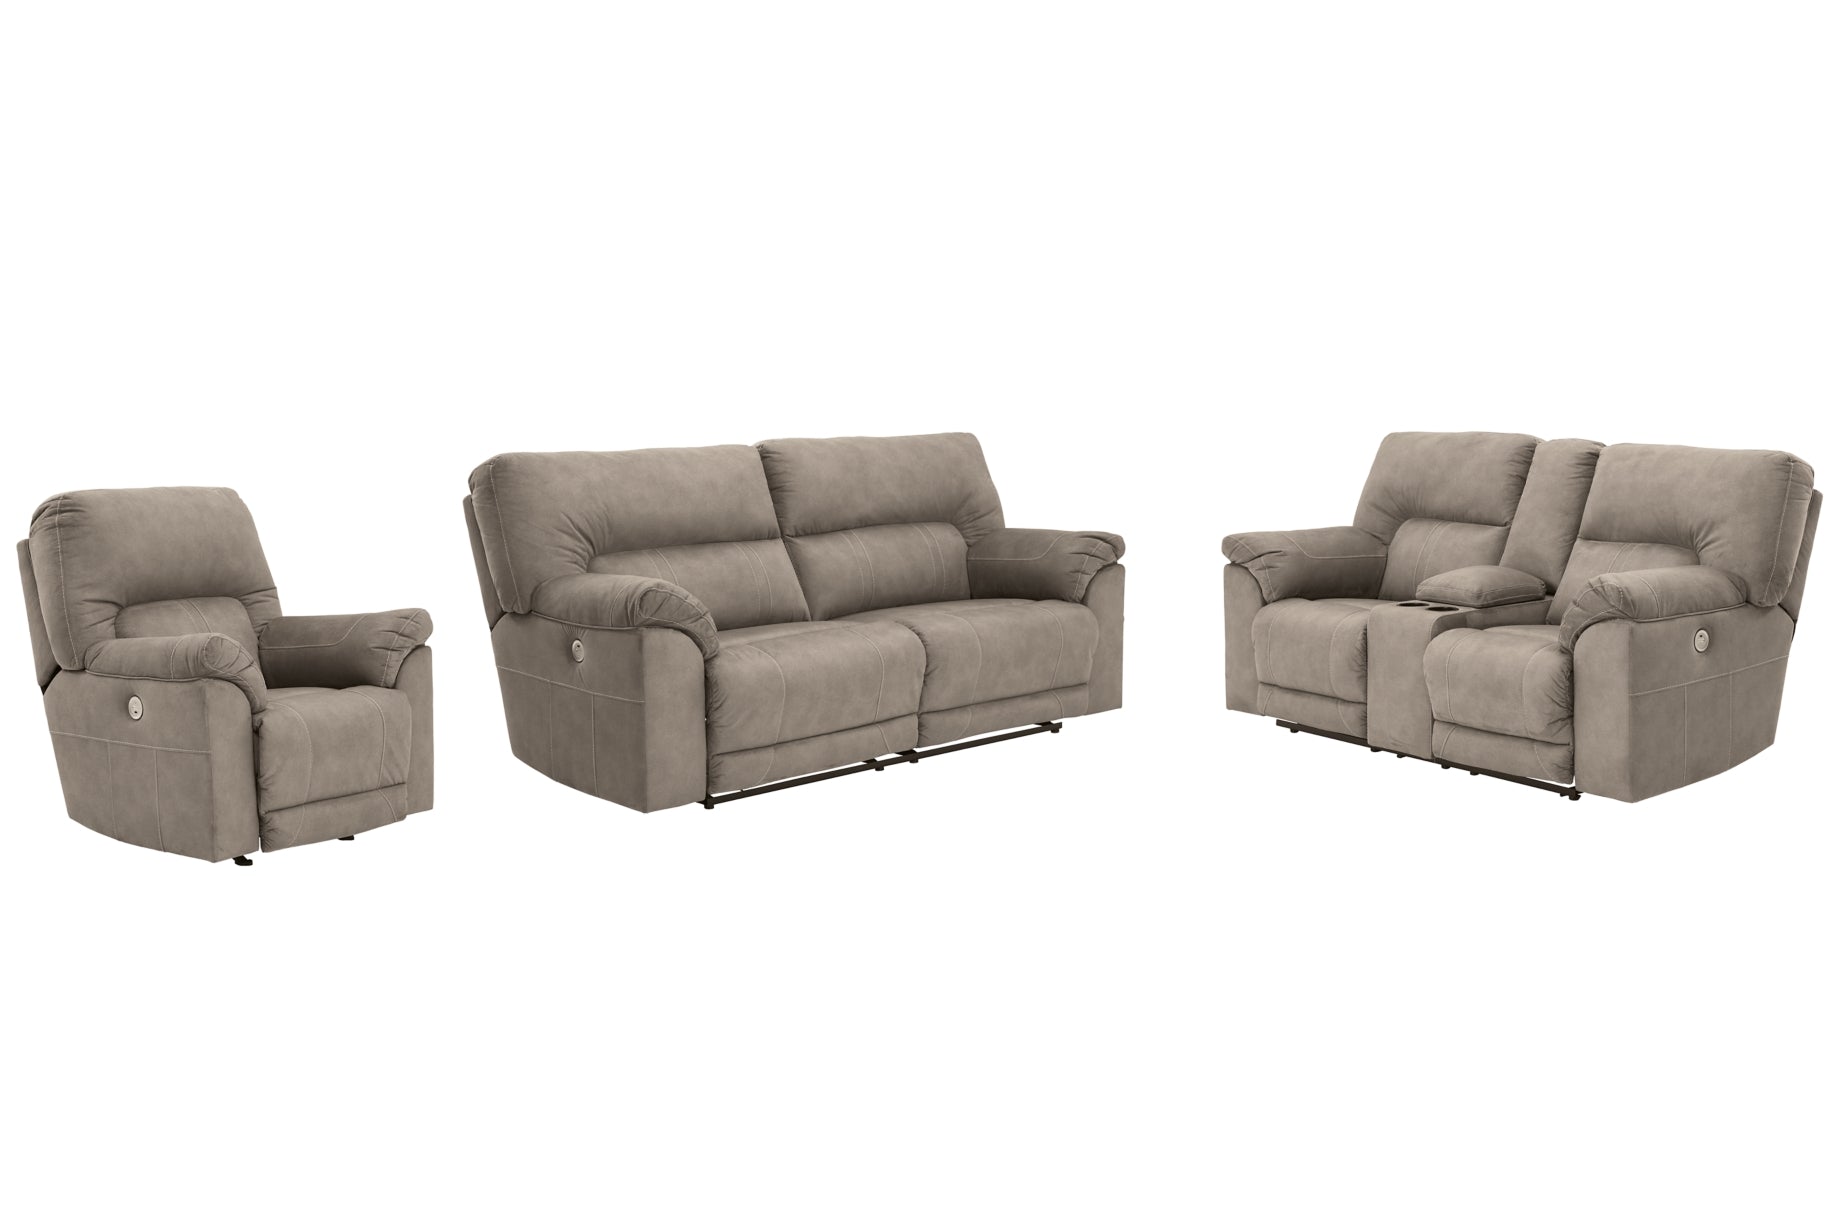 Cavalcade Sofa, Loveseat and Recliner - PKG007330 - furniture place usa